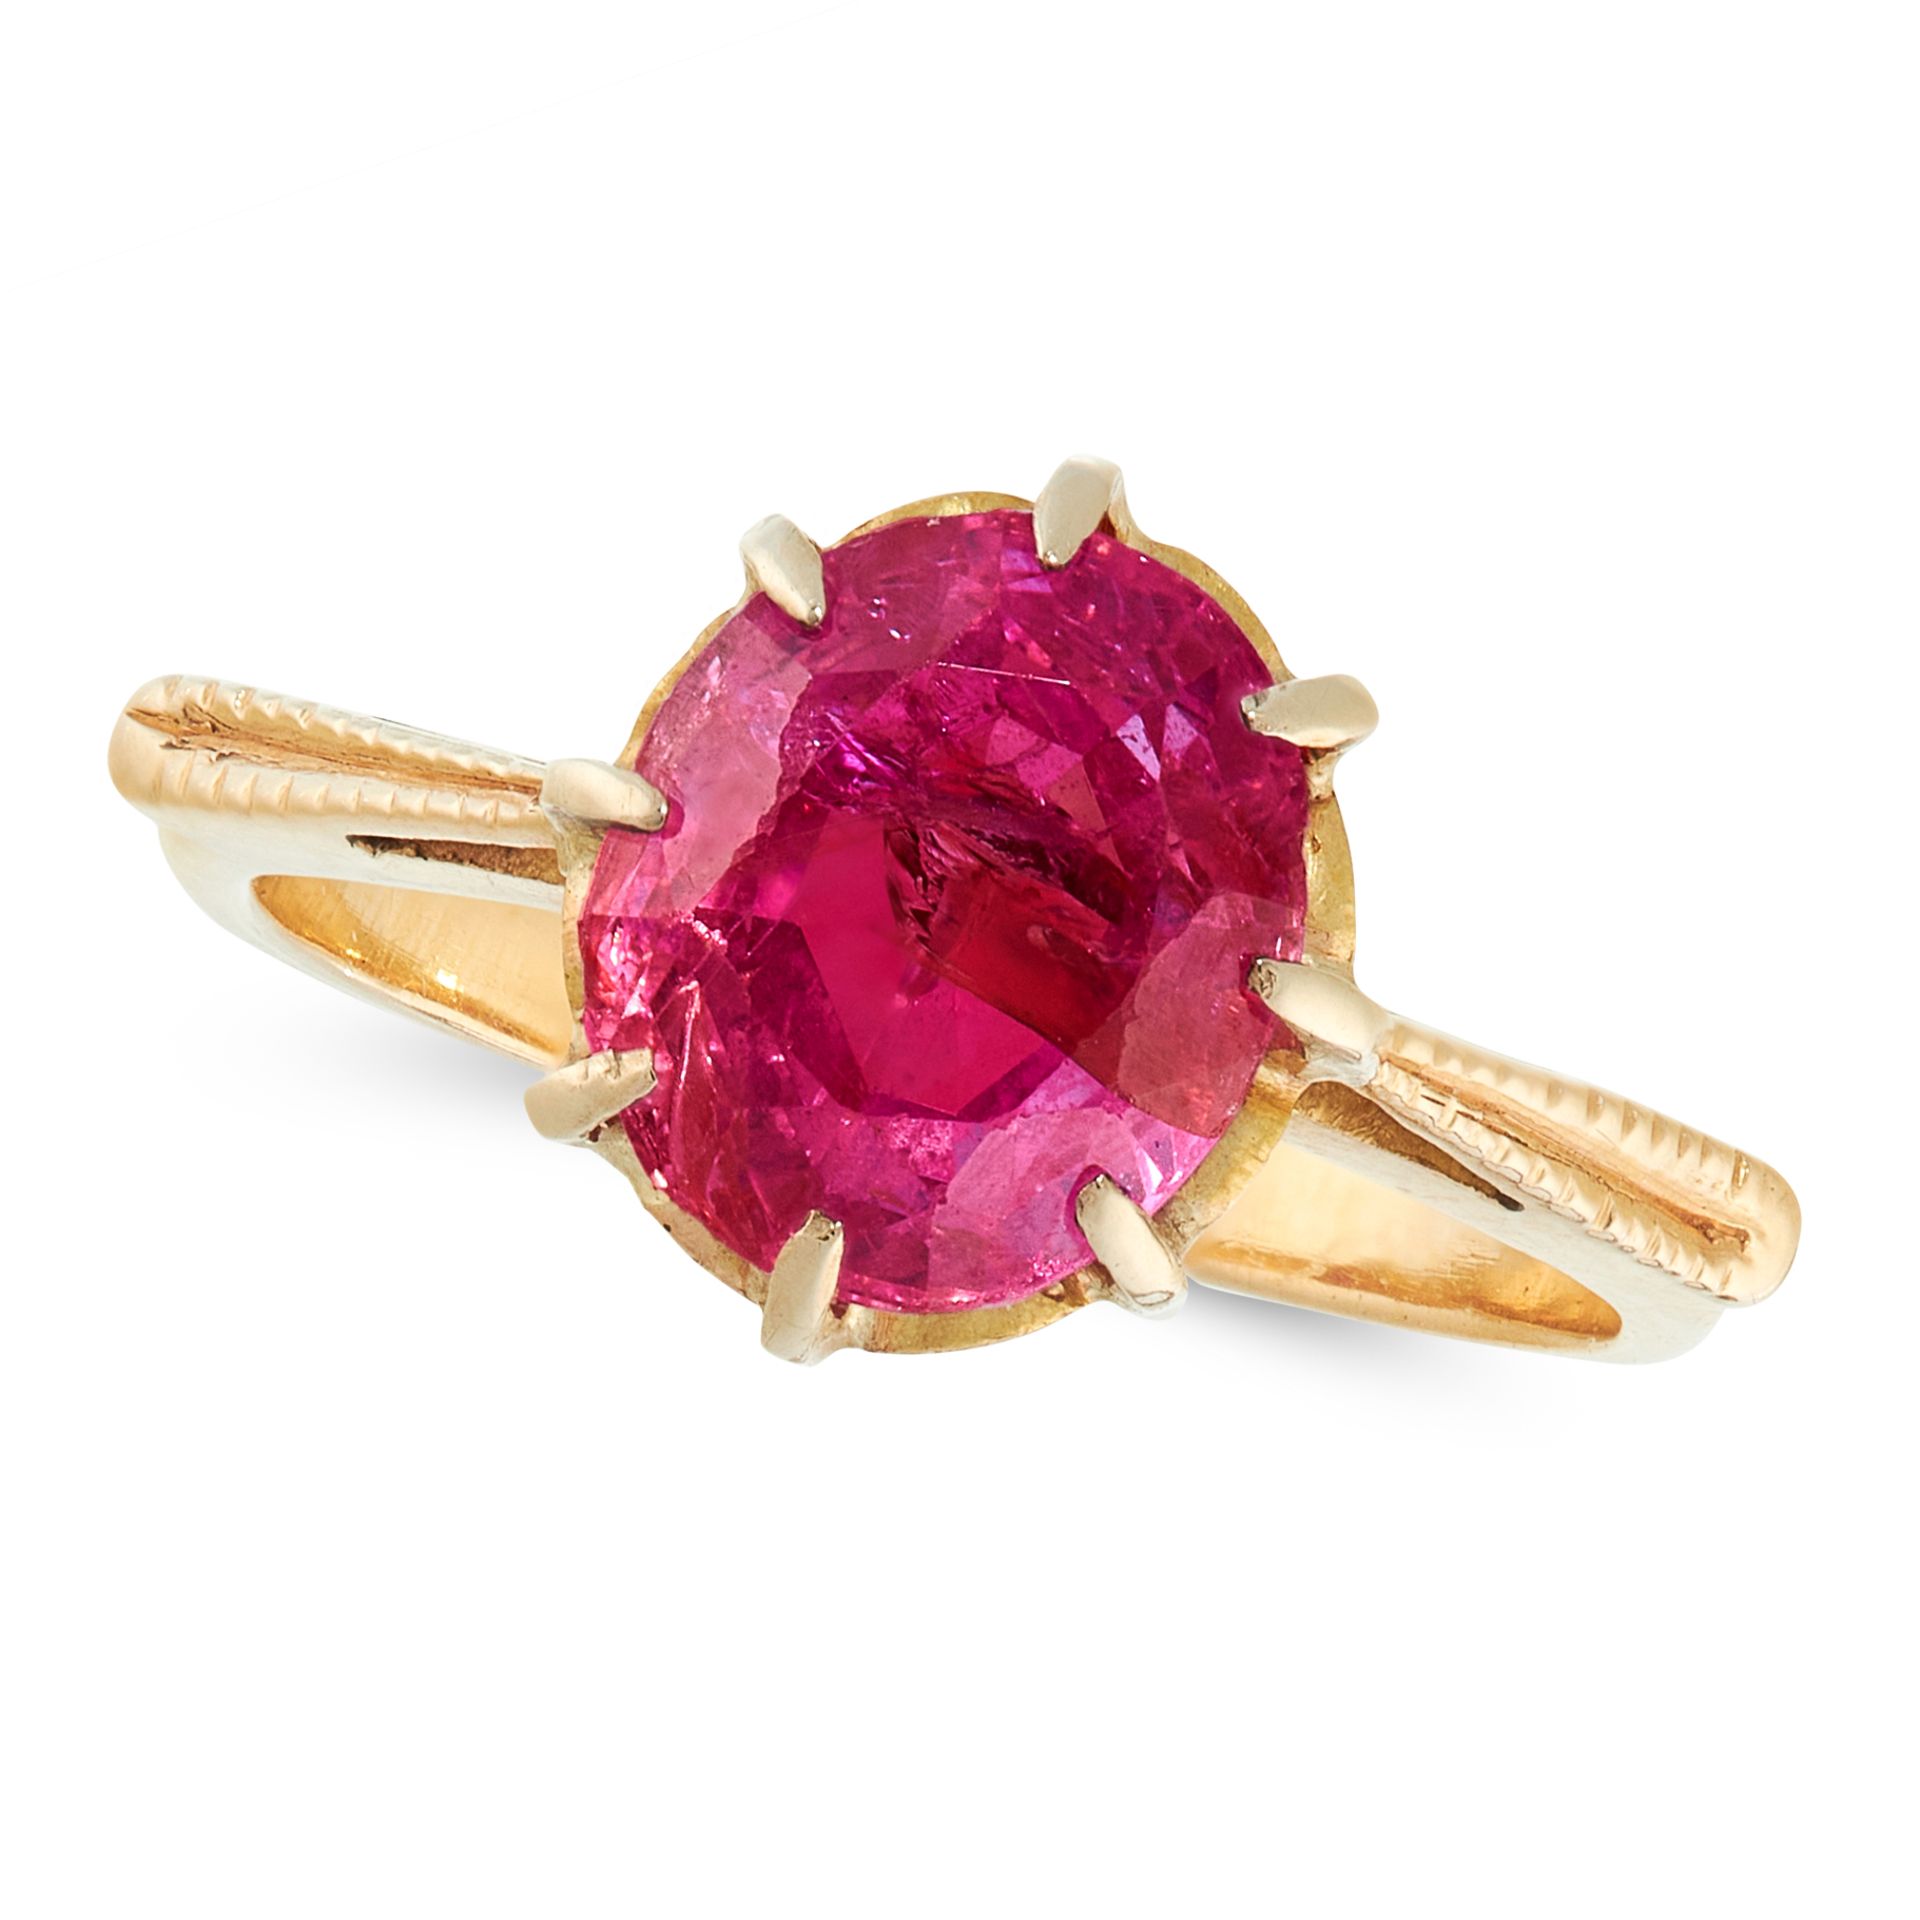 BURMA NO HEAT RUBY DRESS RING in high carat yellow gold, set with an oval cut ruby of 2.53 carats,